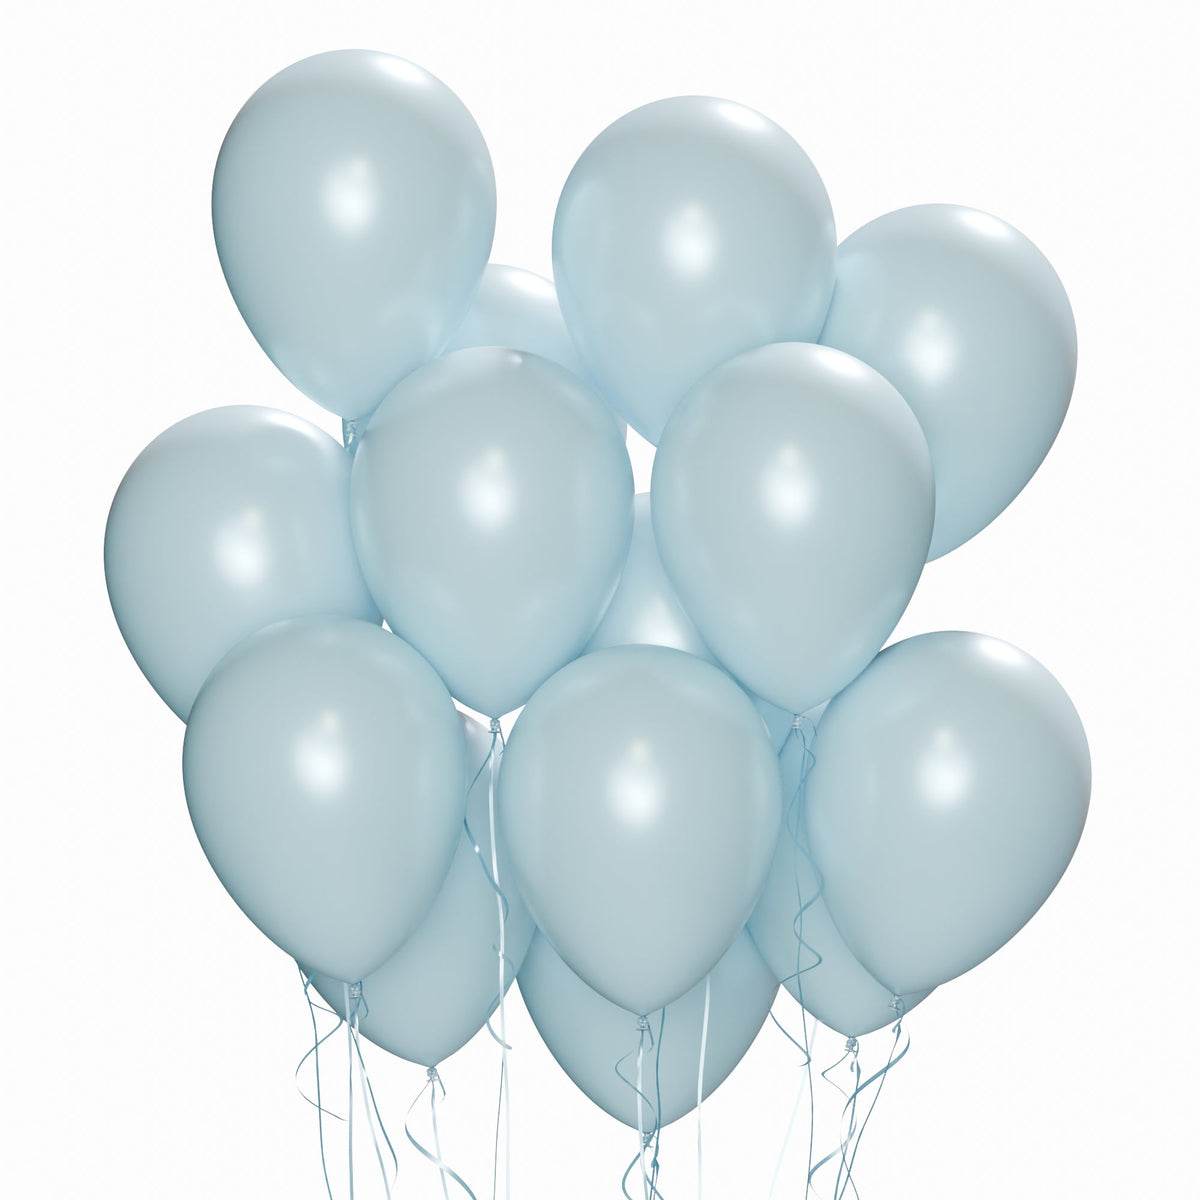 WIDE OCEAN INTERNATIONAL TRADE BEIJING CO., LTD Balloons Baby Blue Latex Balloon 12 Inches, Pearl Collection, 15 Count 810064197925